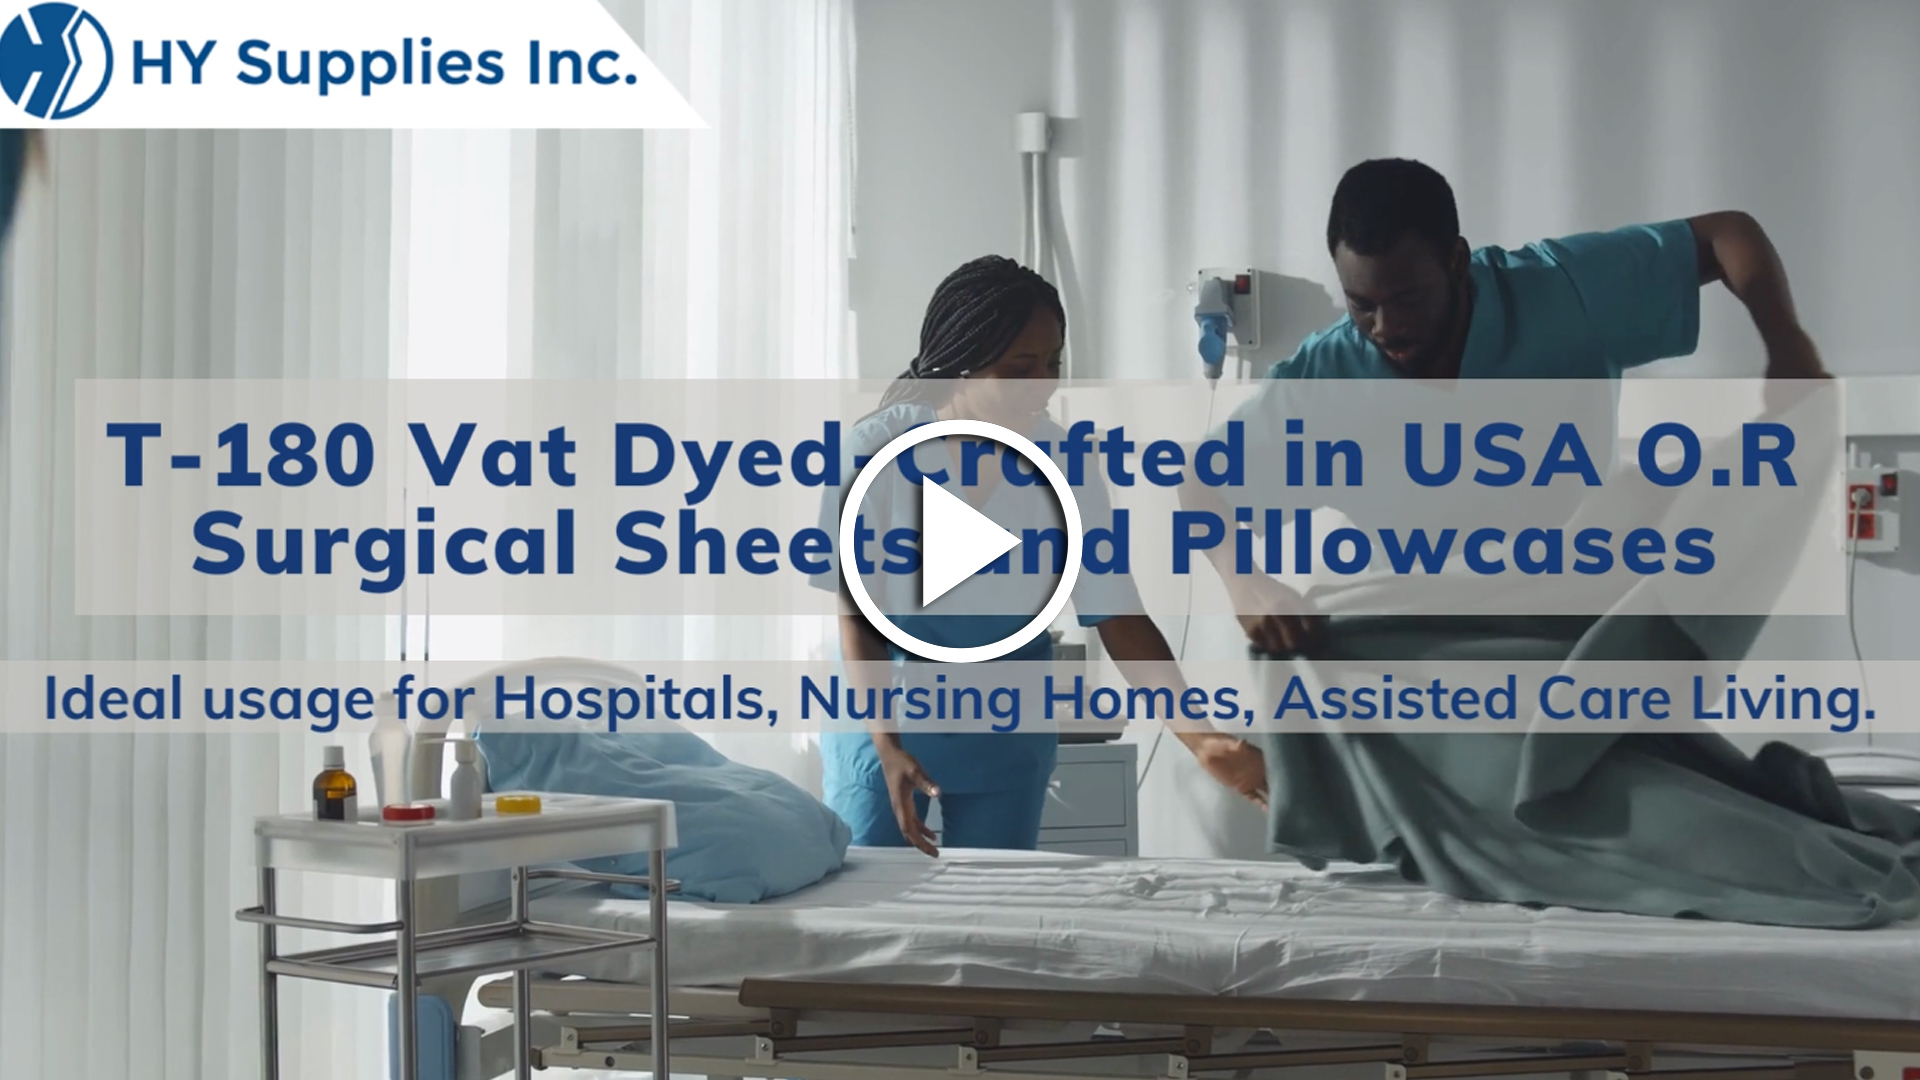 T-180 Vat Dyed-Crafted in USA O.R Surgical Sheets and Pillowcases